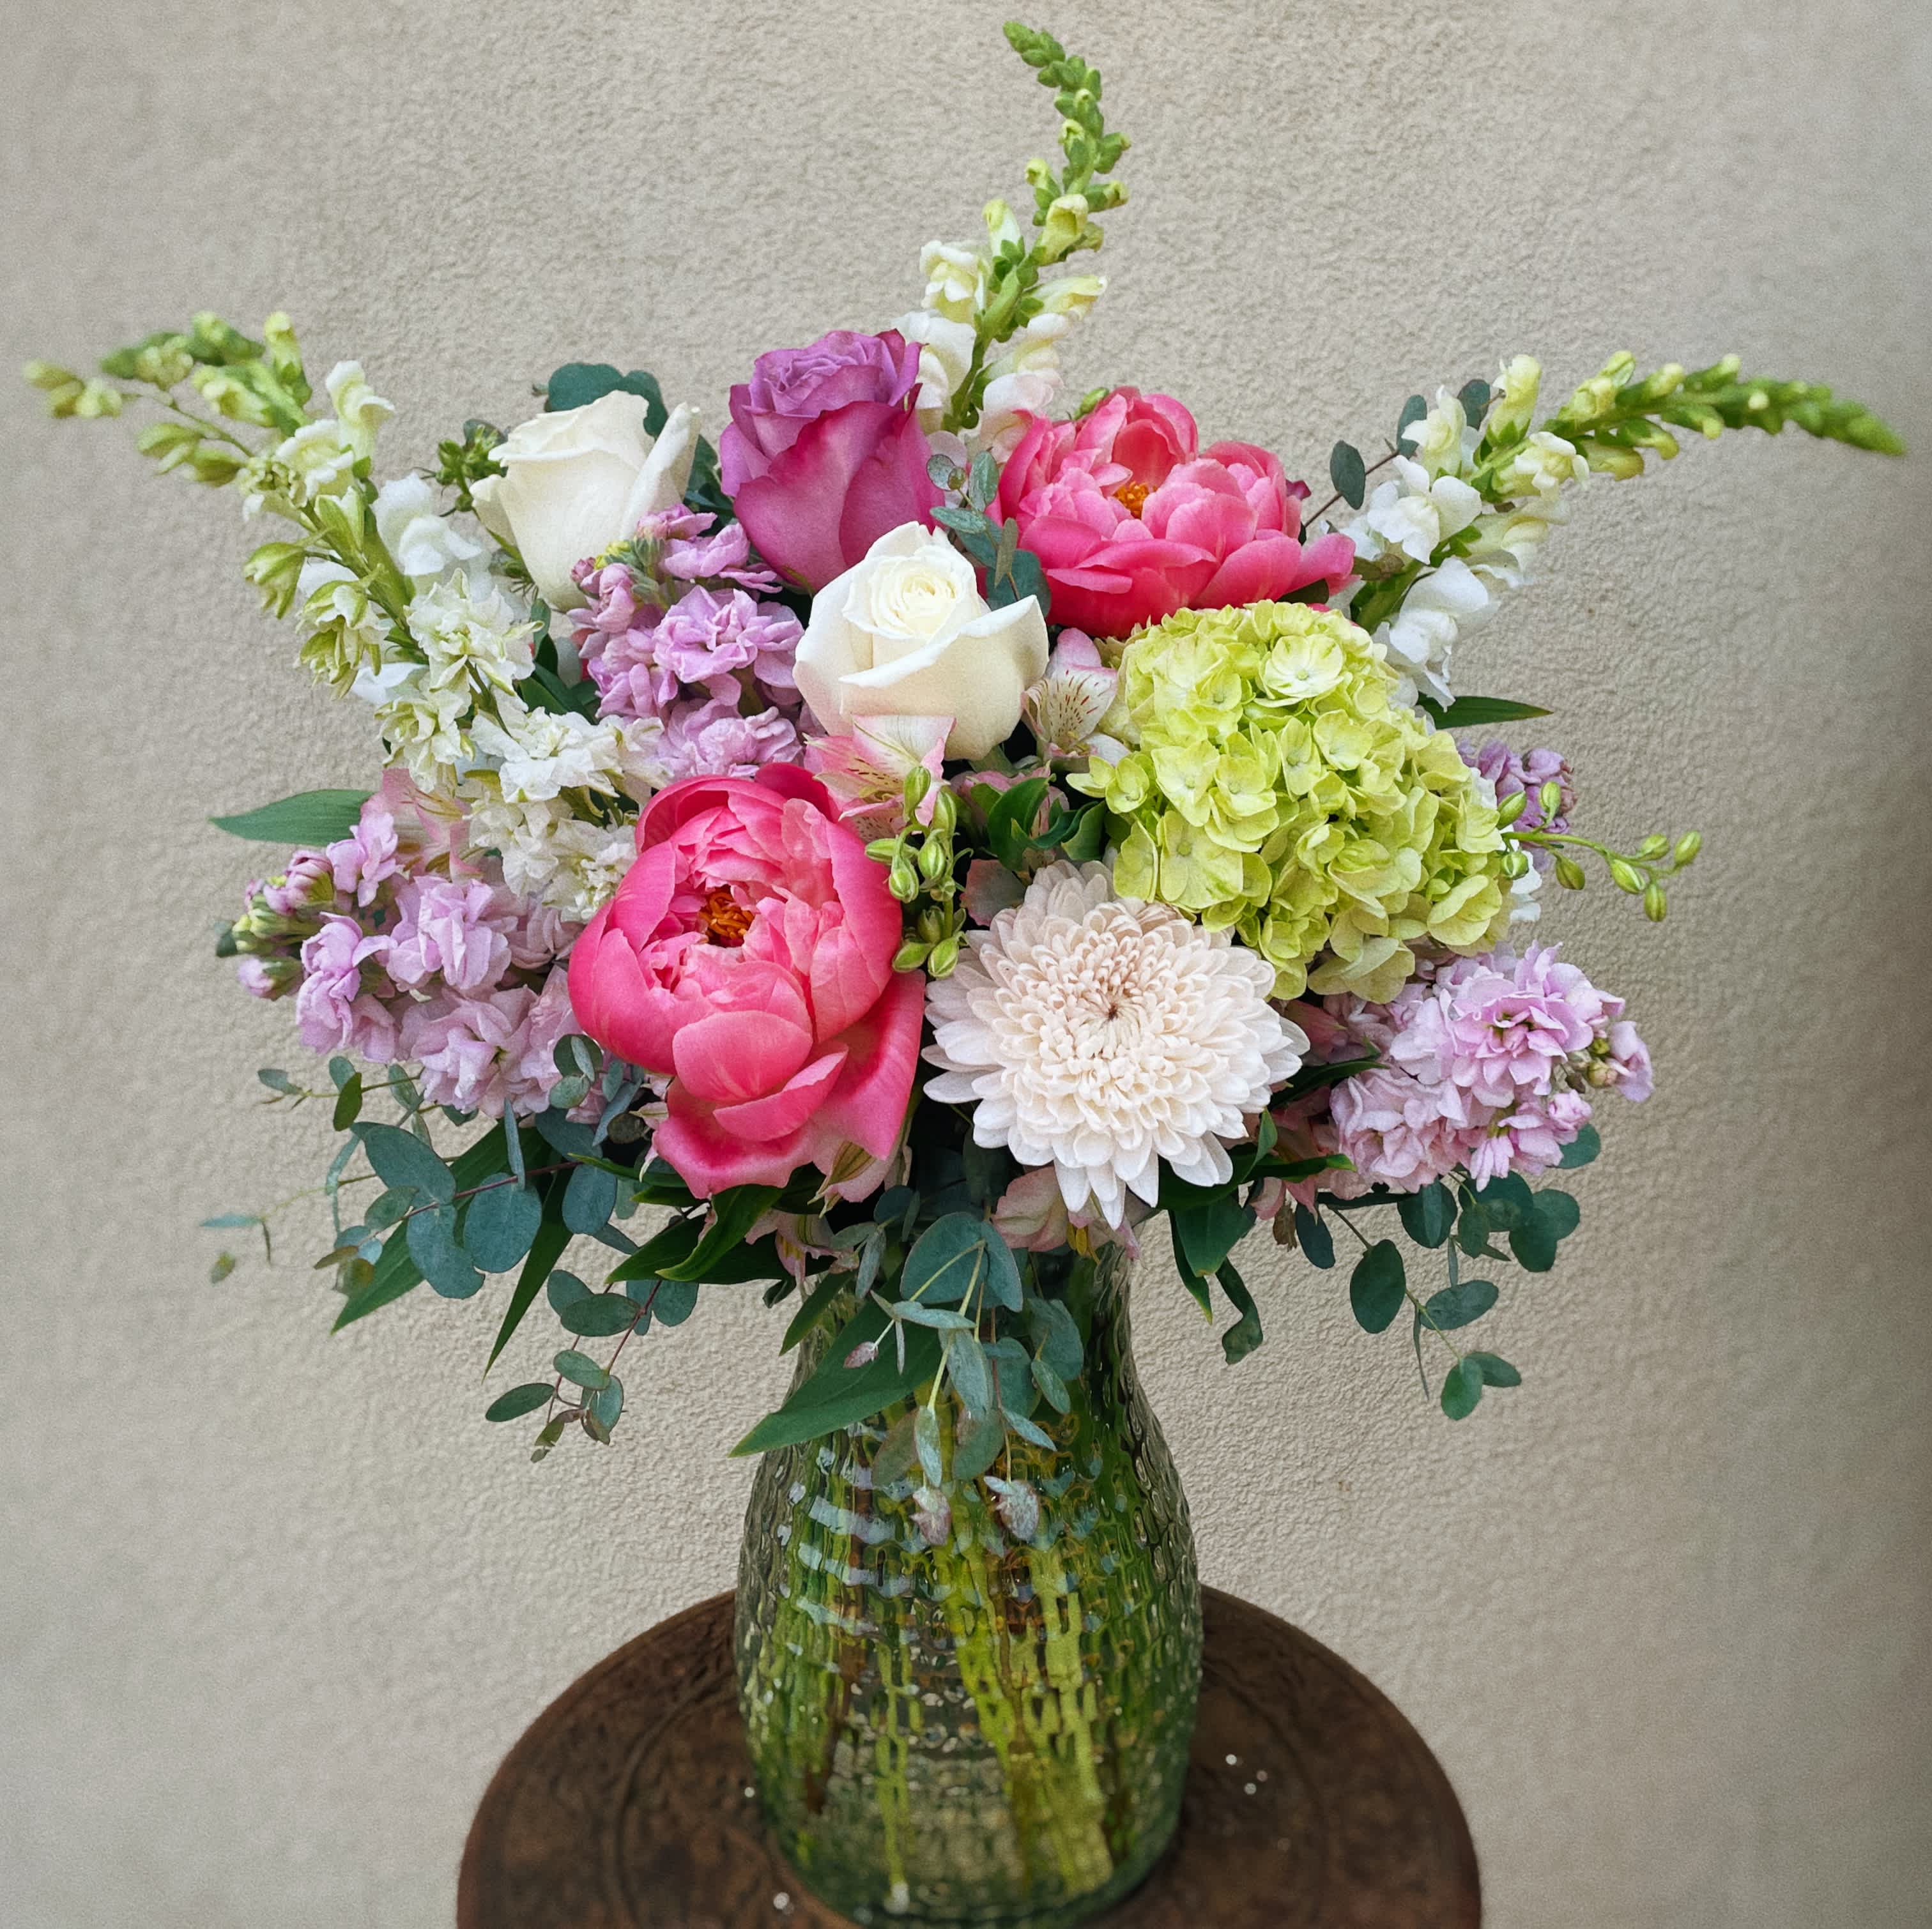 Cosmopolitan - This arrangement has peony, roses, stock, snapdragon and so much more.